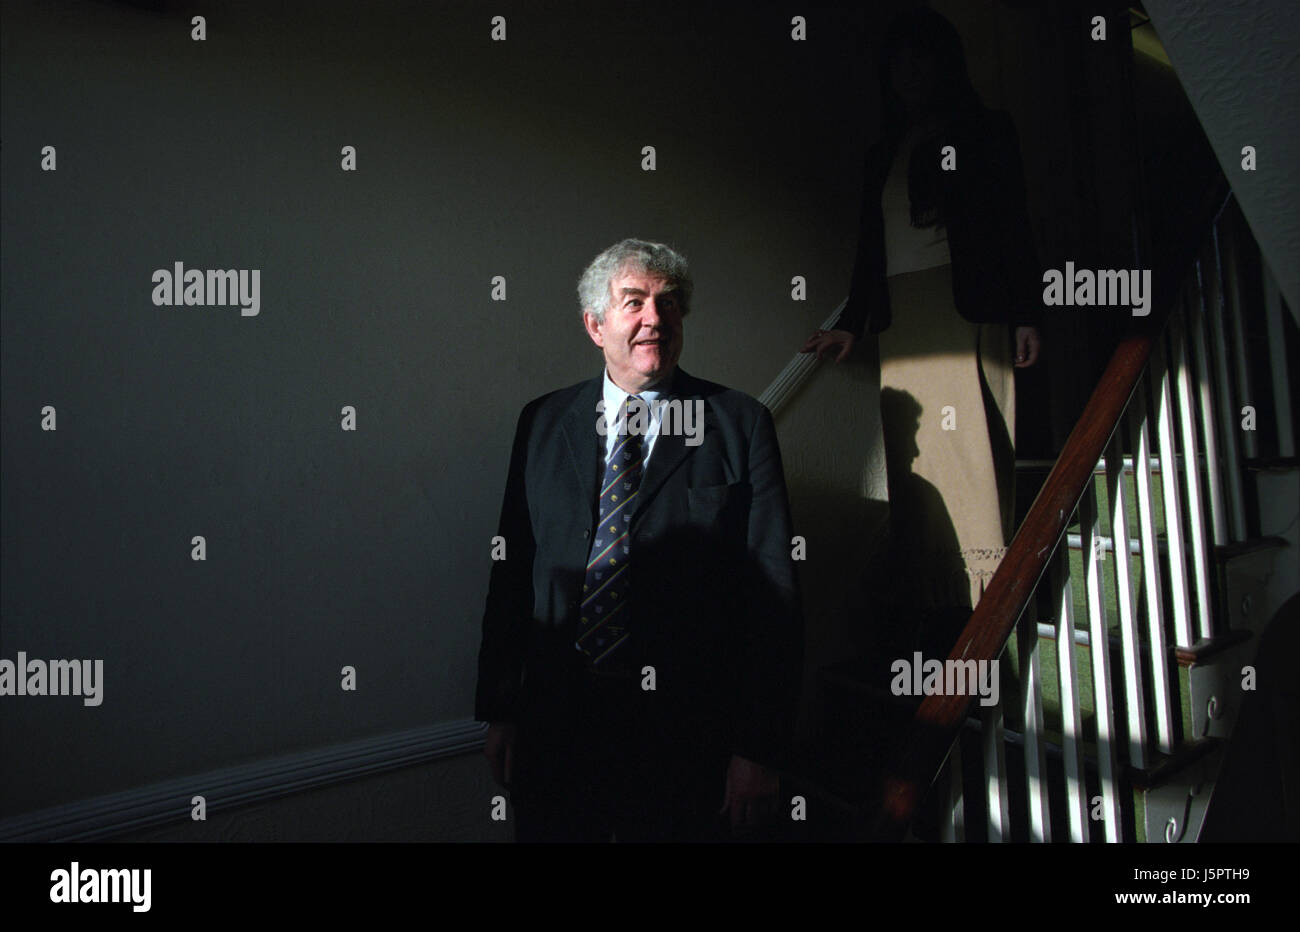 Rhodri Morgan (Labour) the former First Minister of the Welsh Assembly Government (2000 - 2009), campaigning  the second Welsh Assembly Elections. He was largely known as the 'Father of Devolution'. Kiran Ridley/Ethos Stock Photo